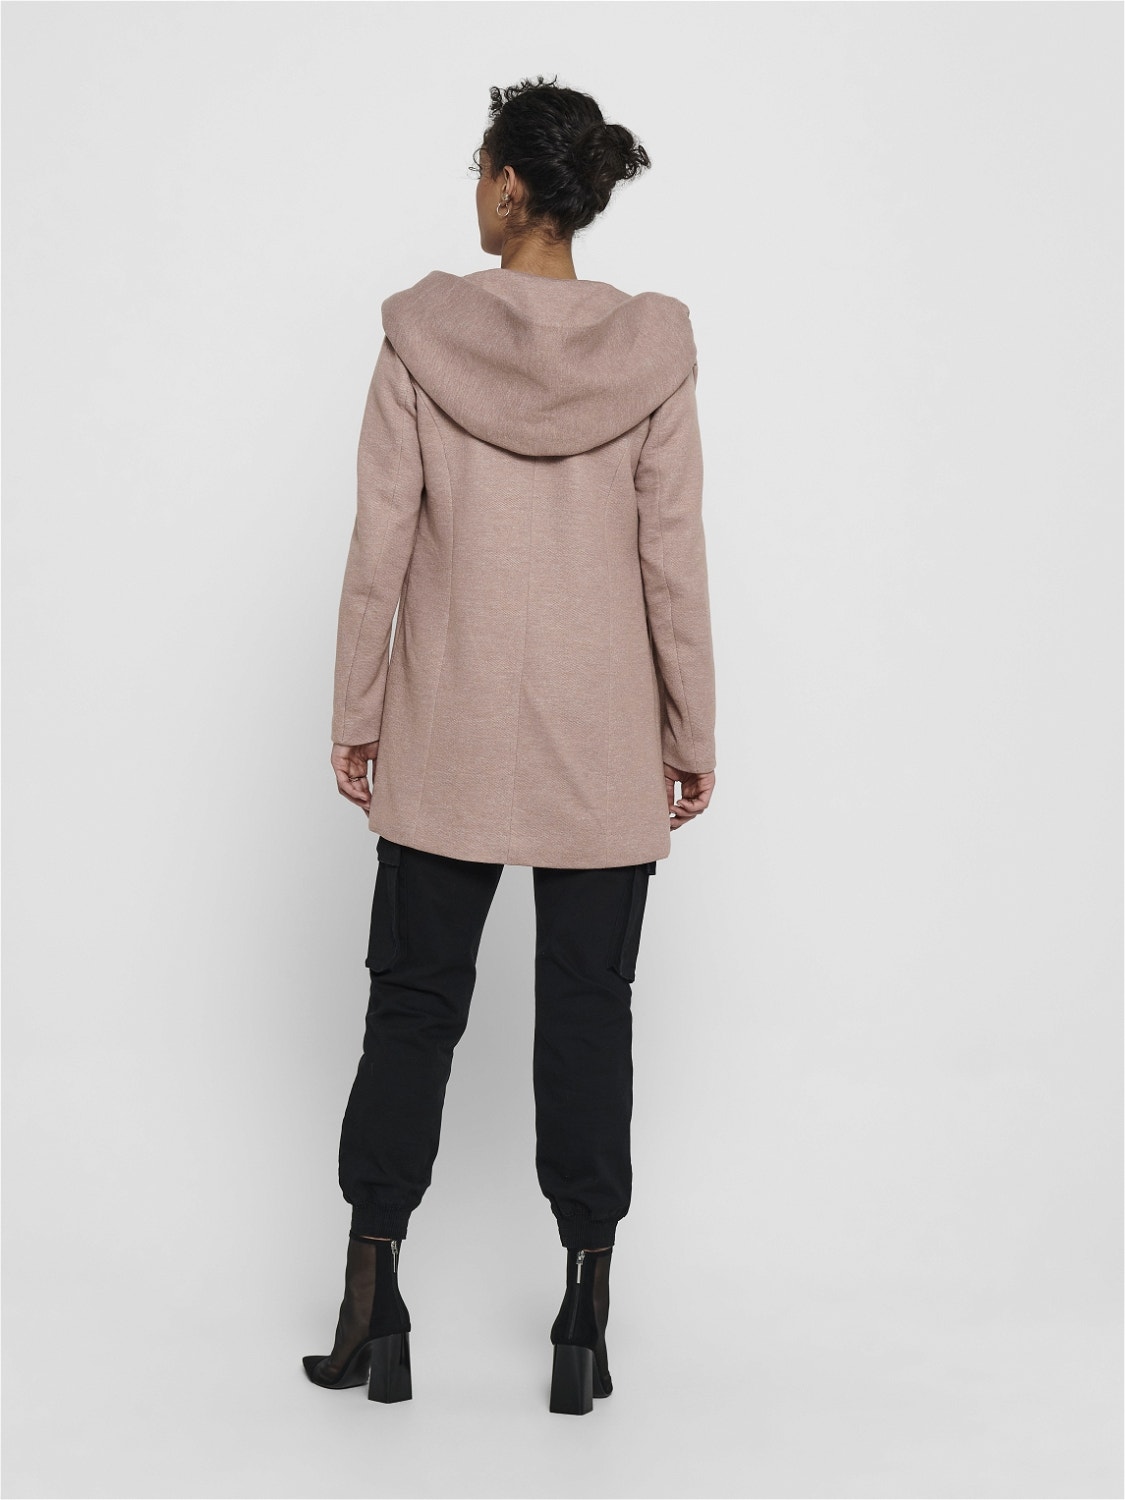 ONLY Coat with hood -Mocha Mousse - 15142911